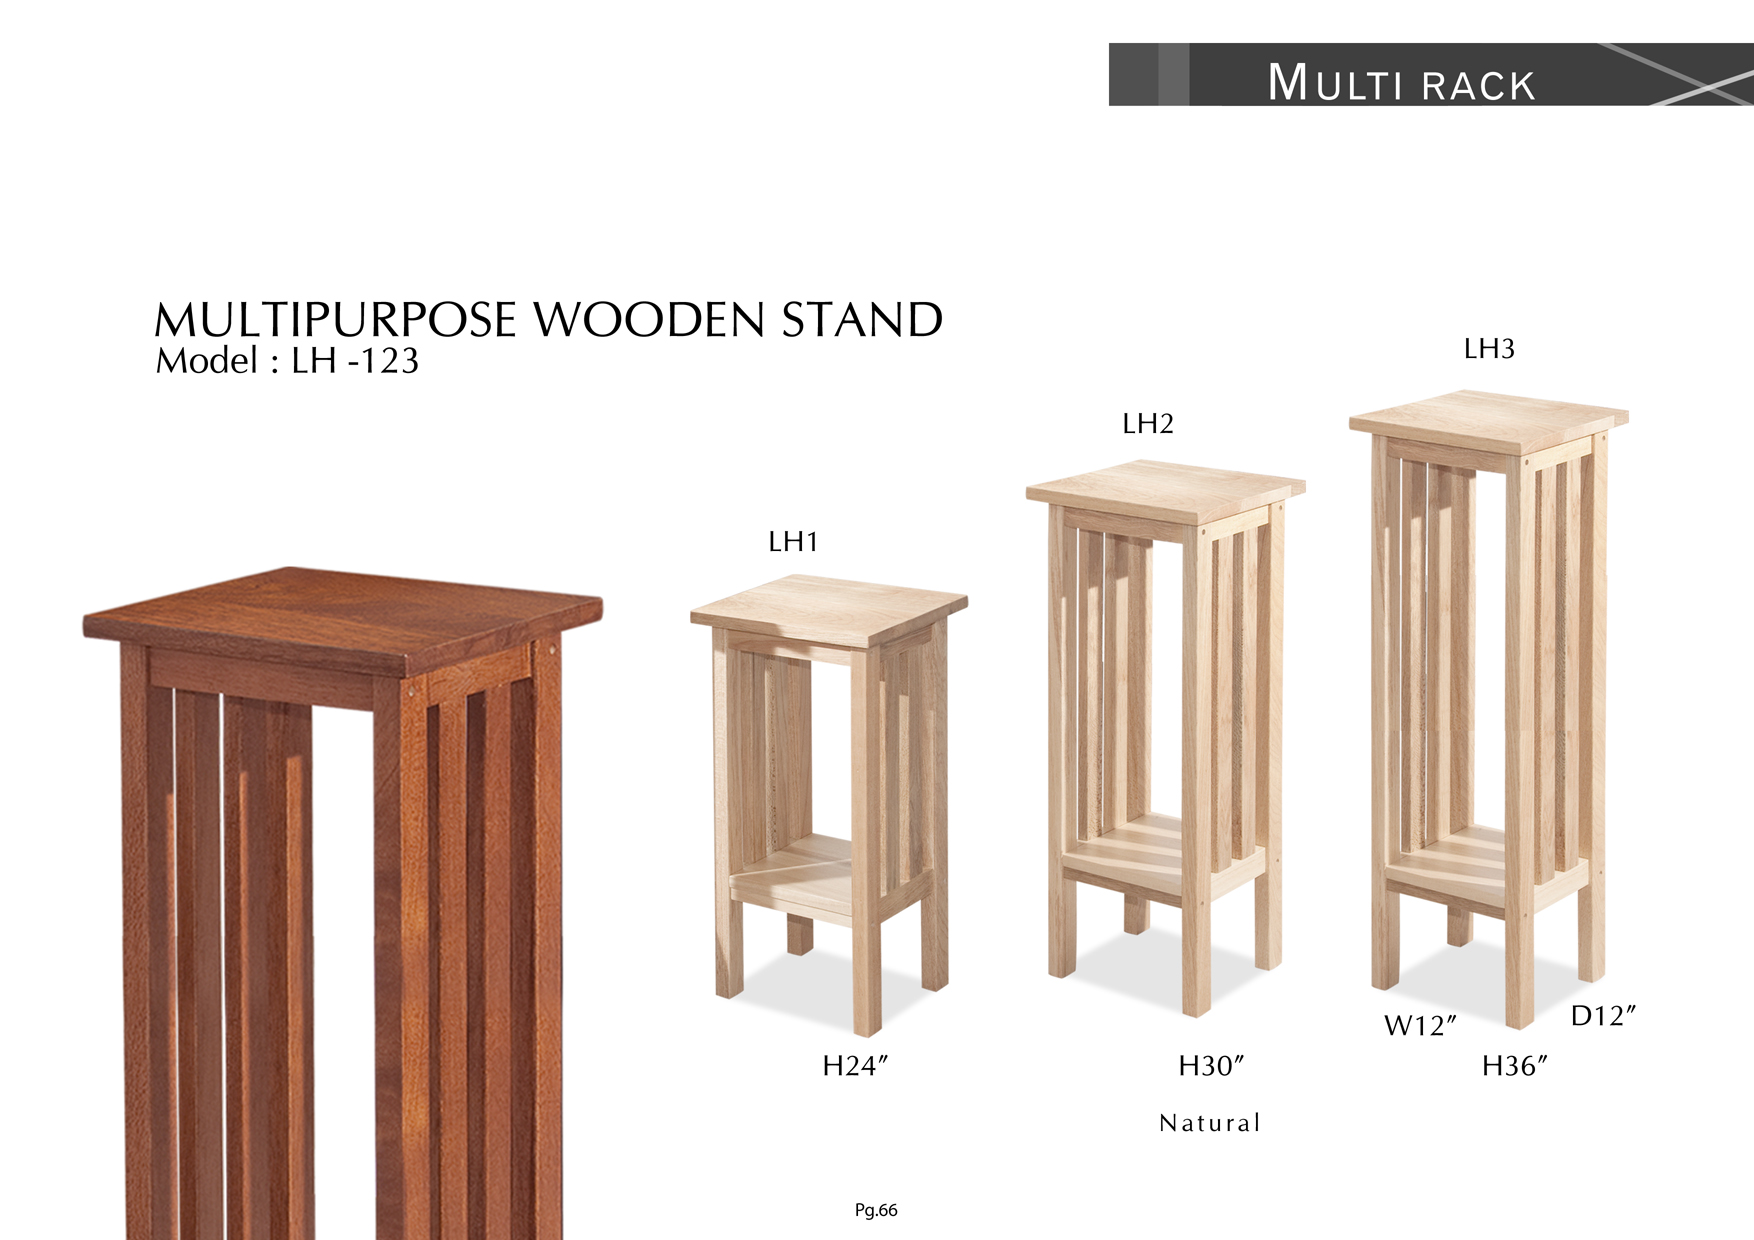 Product: PG66. MULTIPURPOSE WOODEN STAND